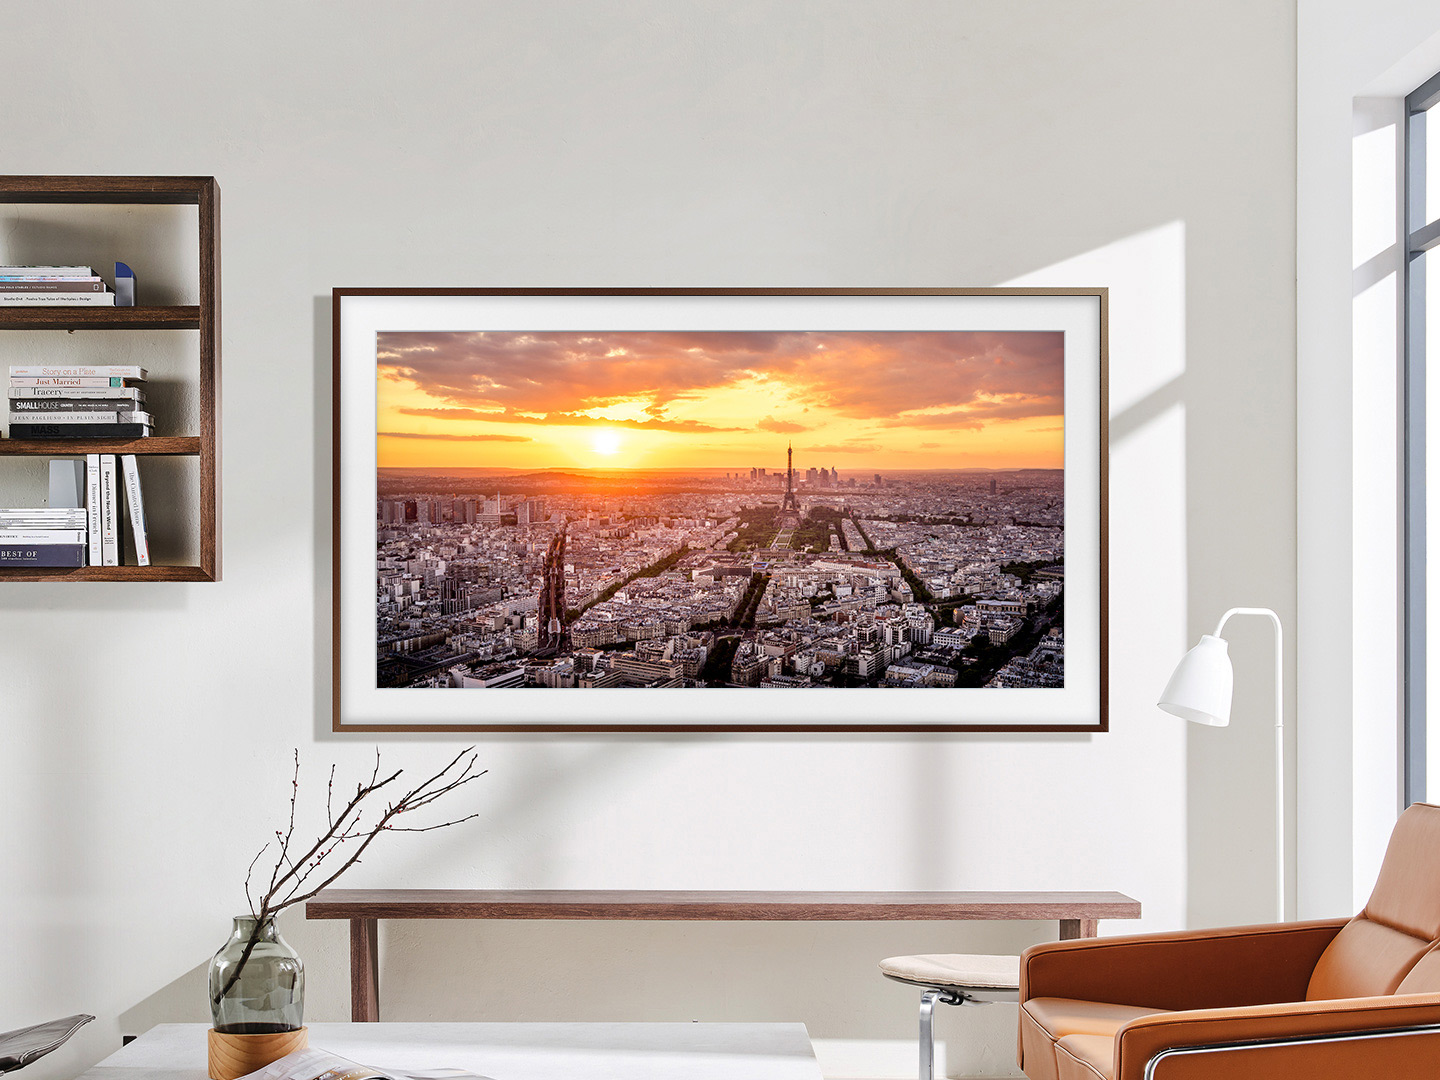 Everything You Need to Know About the Samsung Frame TV বিডি ব্লগ ২৪.কম